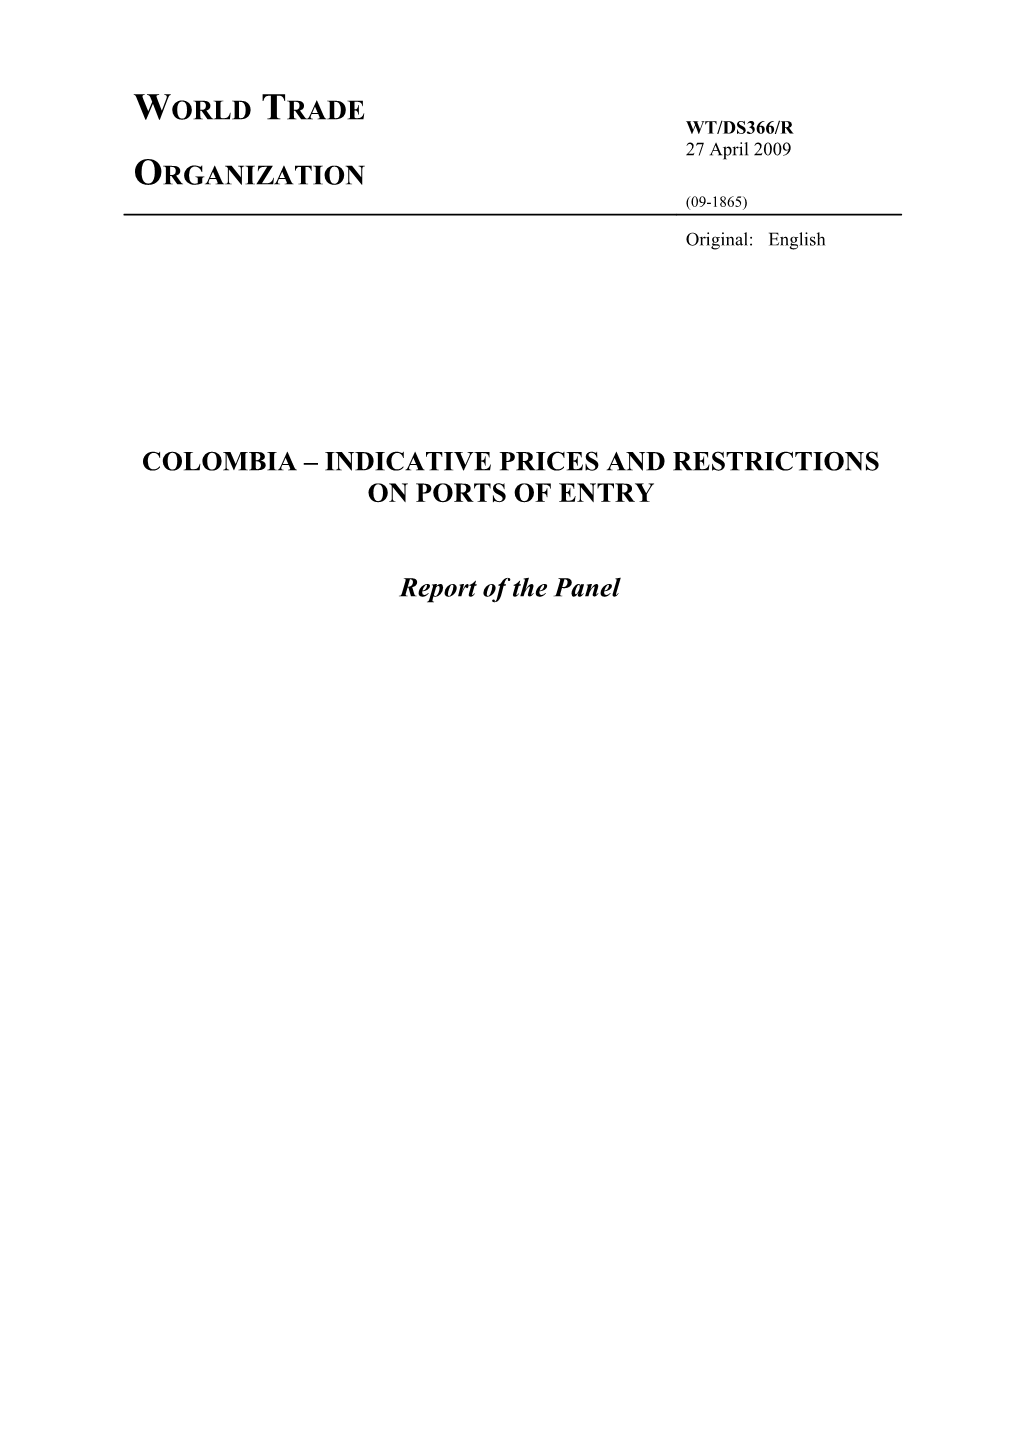 Colombia Indicative Prices and Restrictions on Ports of Entry